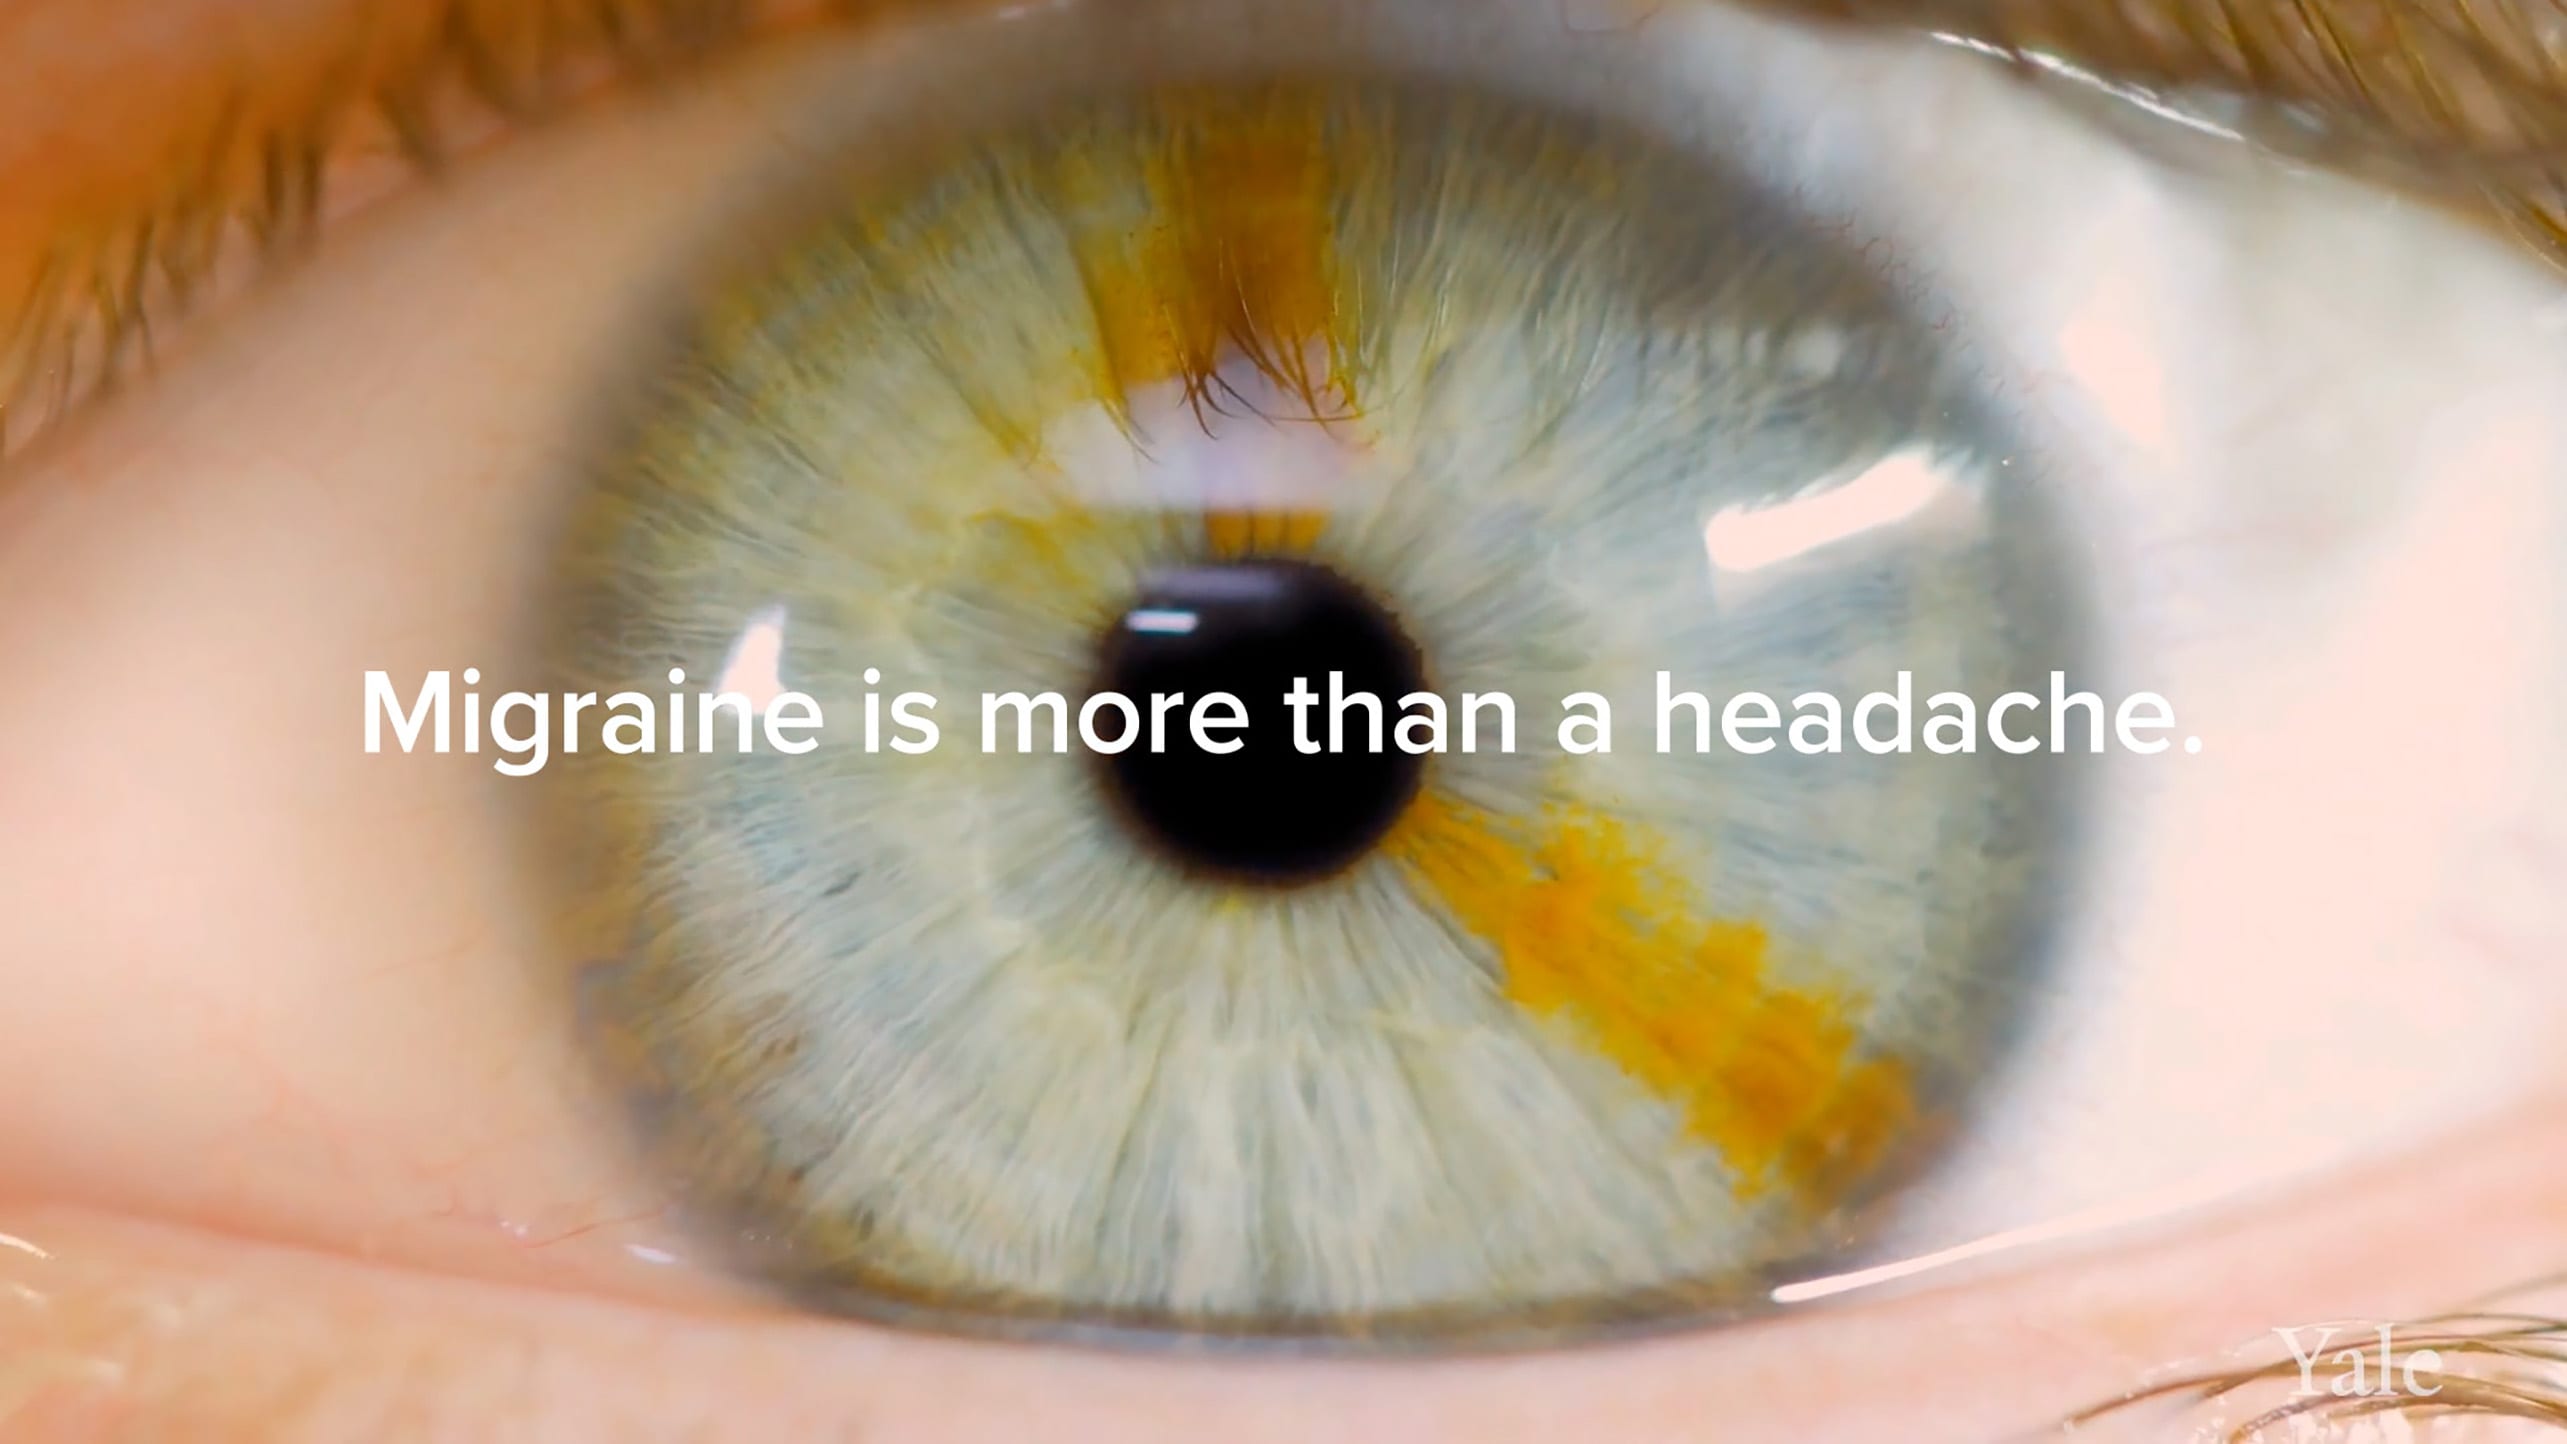 Extreme closeup image of a hazel-colored human eye with text that reads "Migraine is more than a headache" 